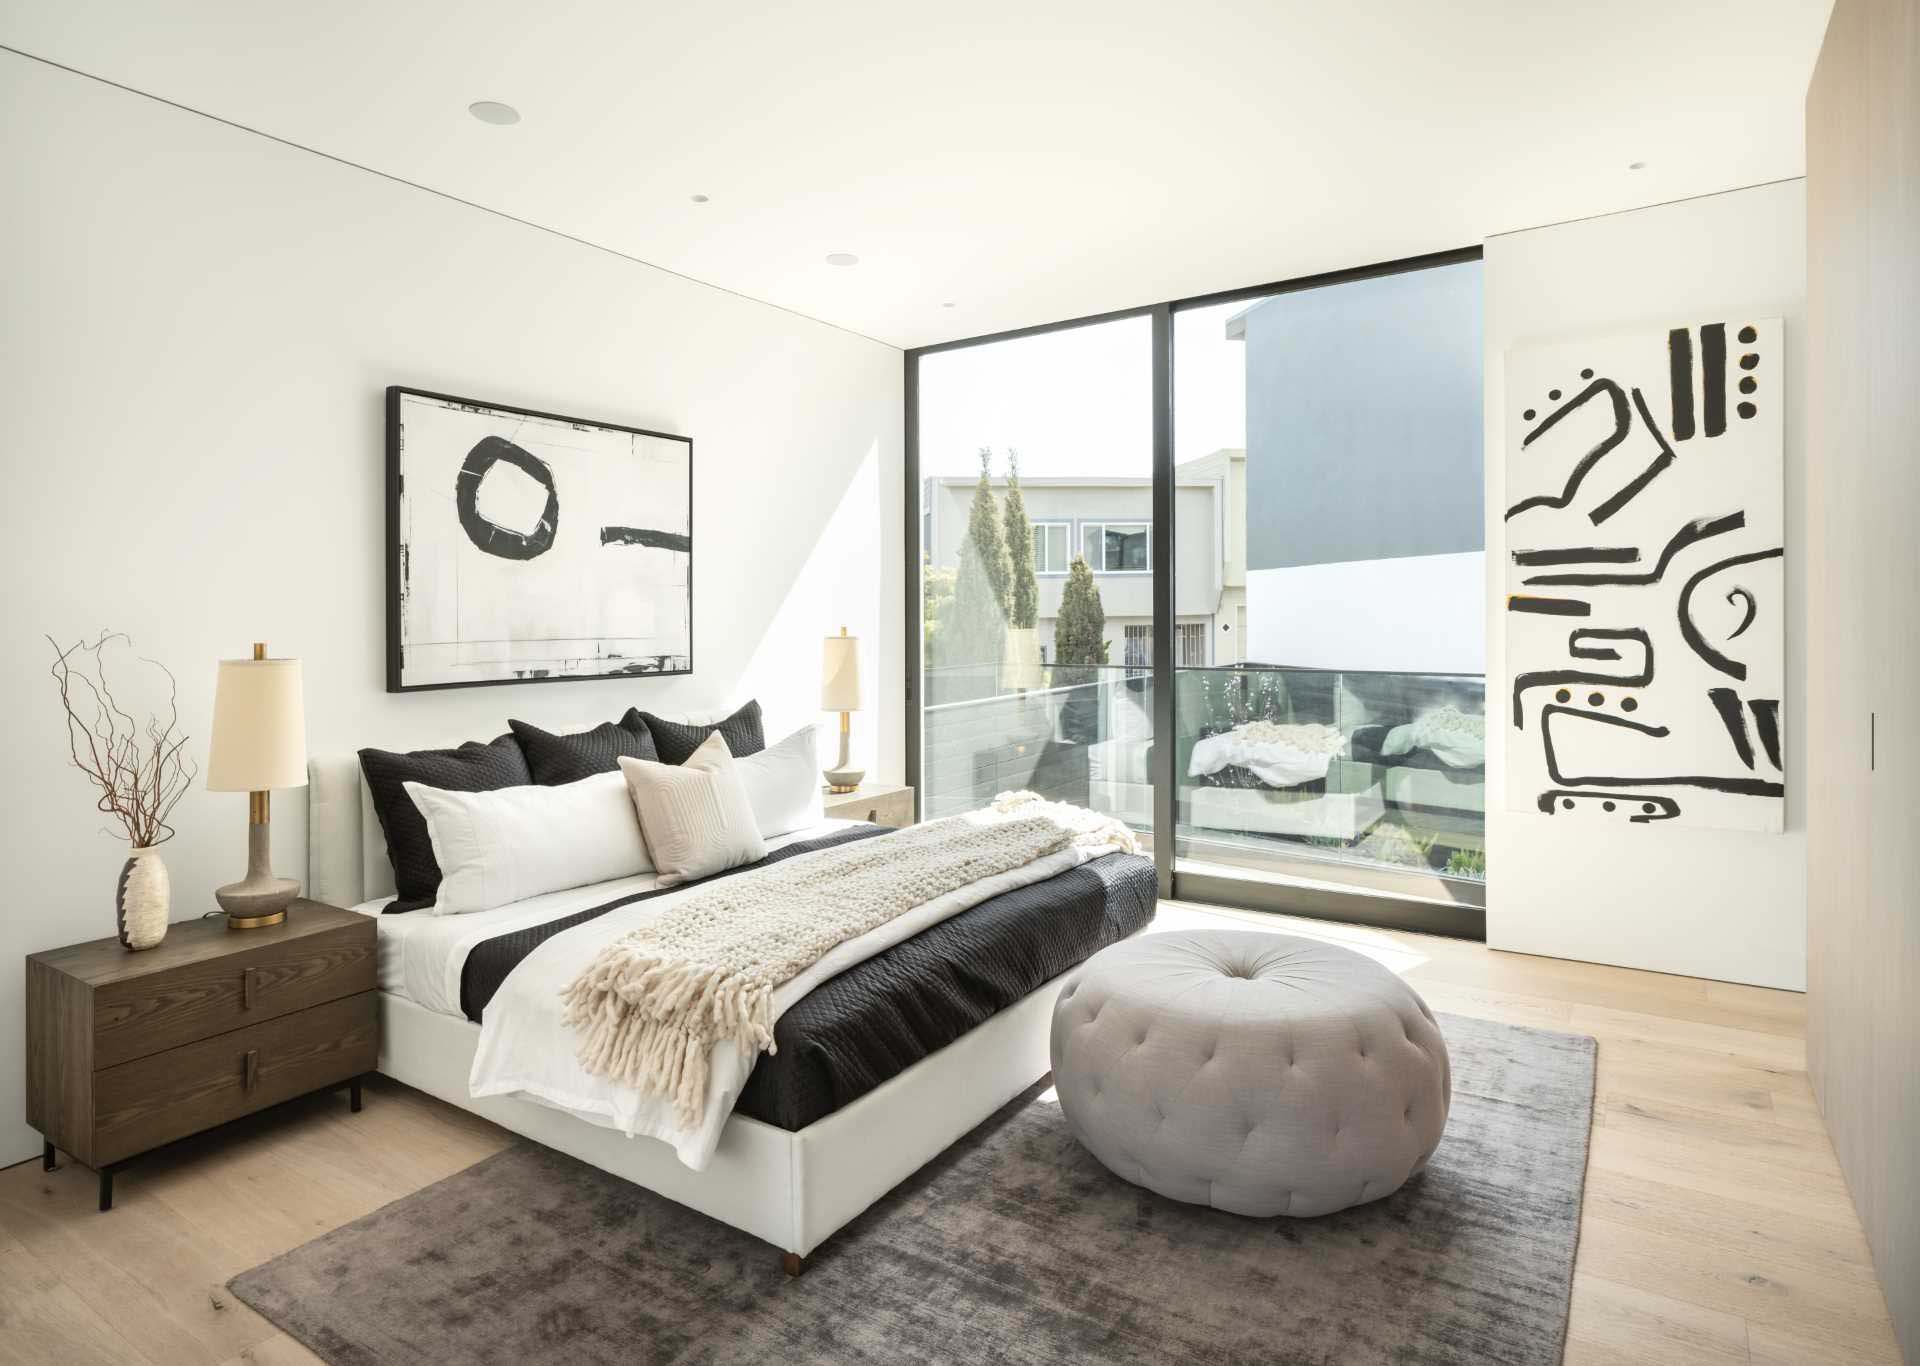 A modern bedroom with black and white artwork.